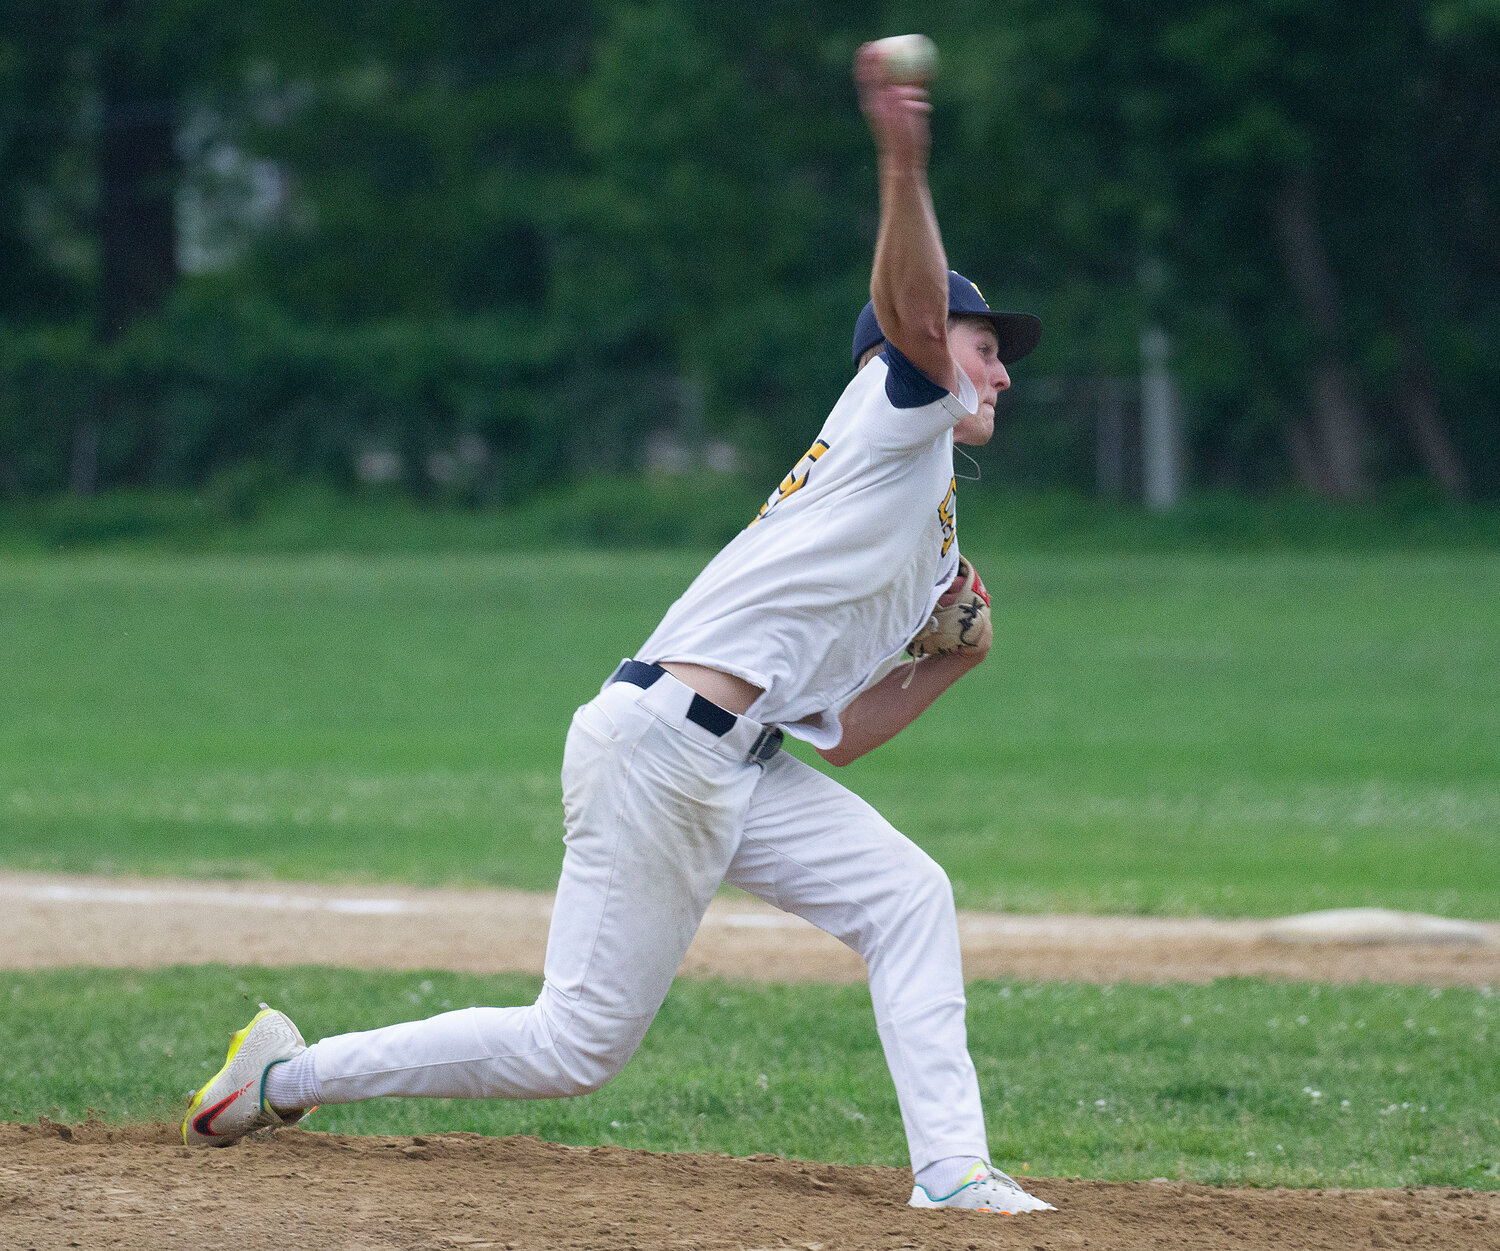 The Eagles' Harrison Cooley, shown pitching in an earlier playoff game, struck out seven East Greenwich batters in Barrington's 5-4 victory on Wednesday, June 7.